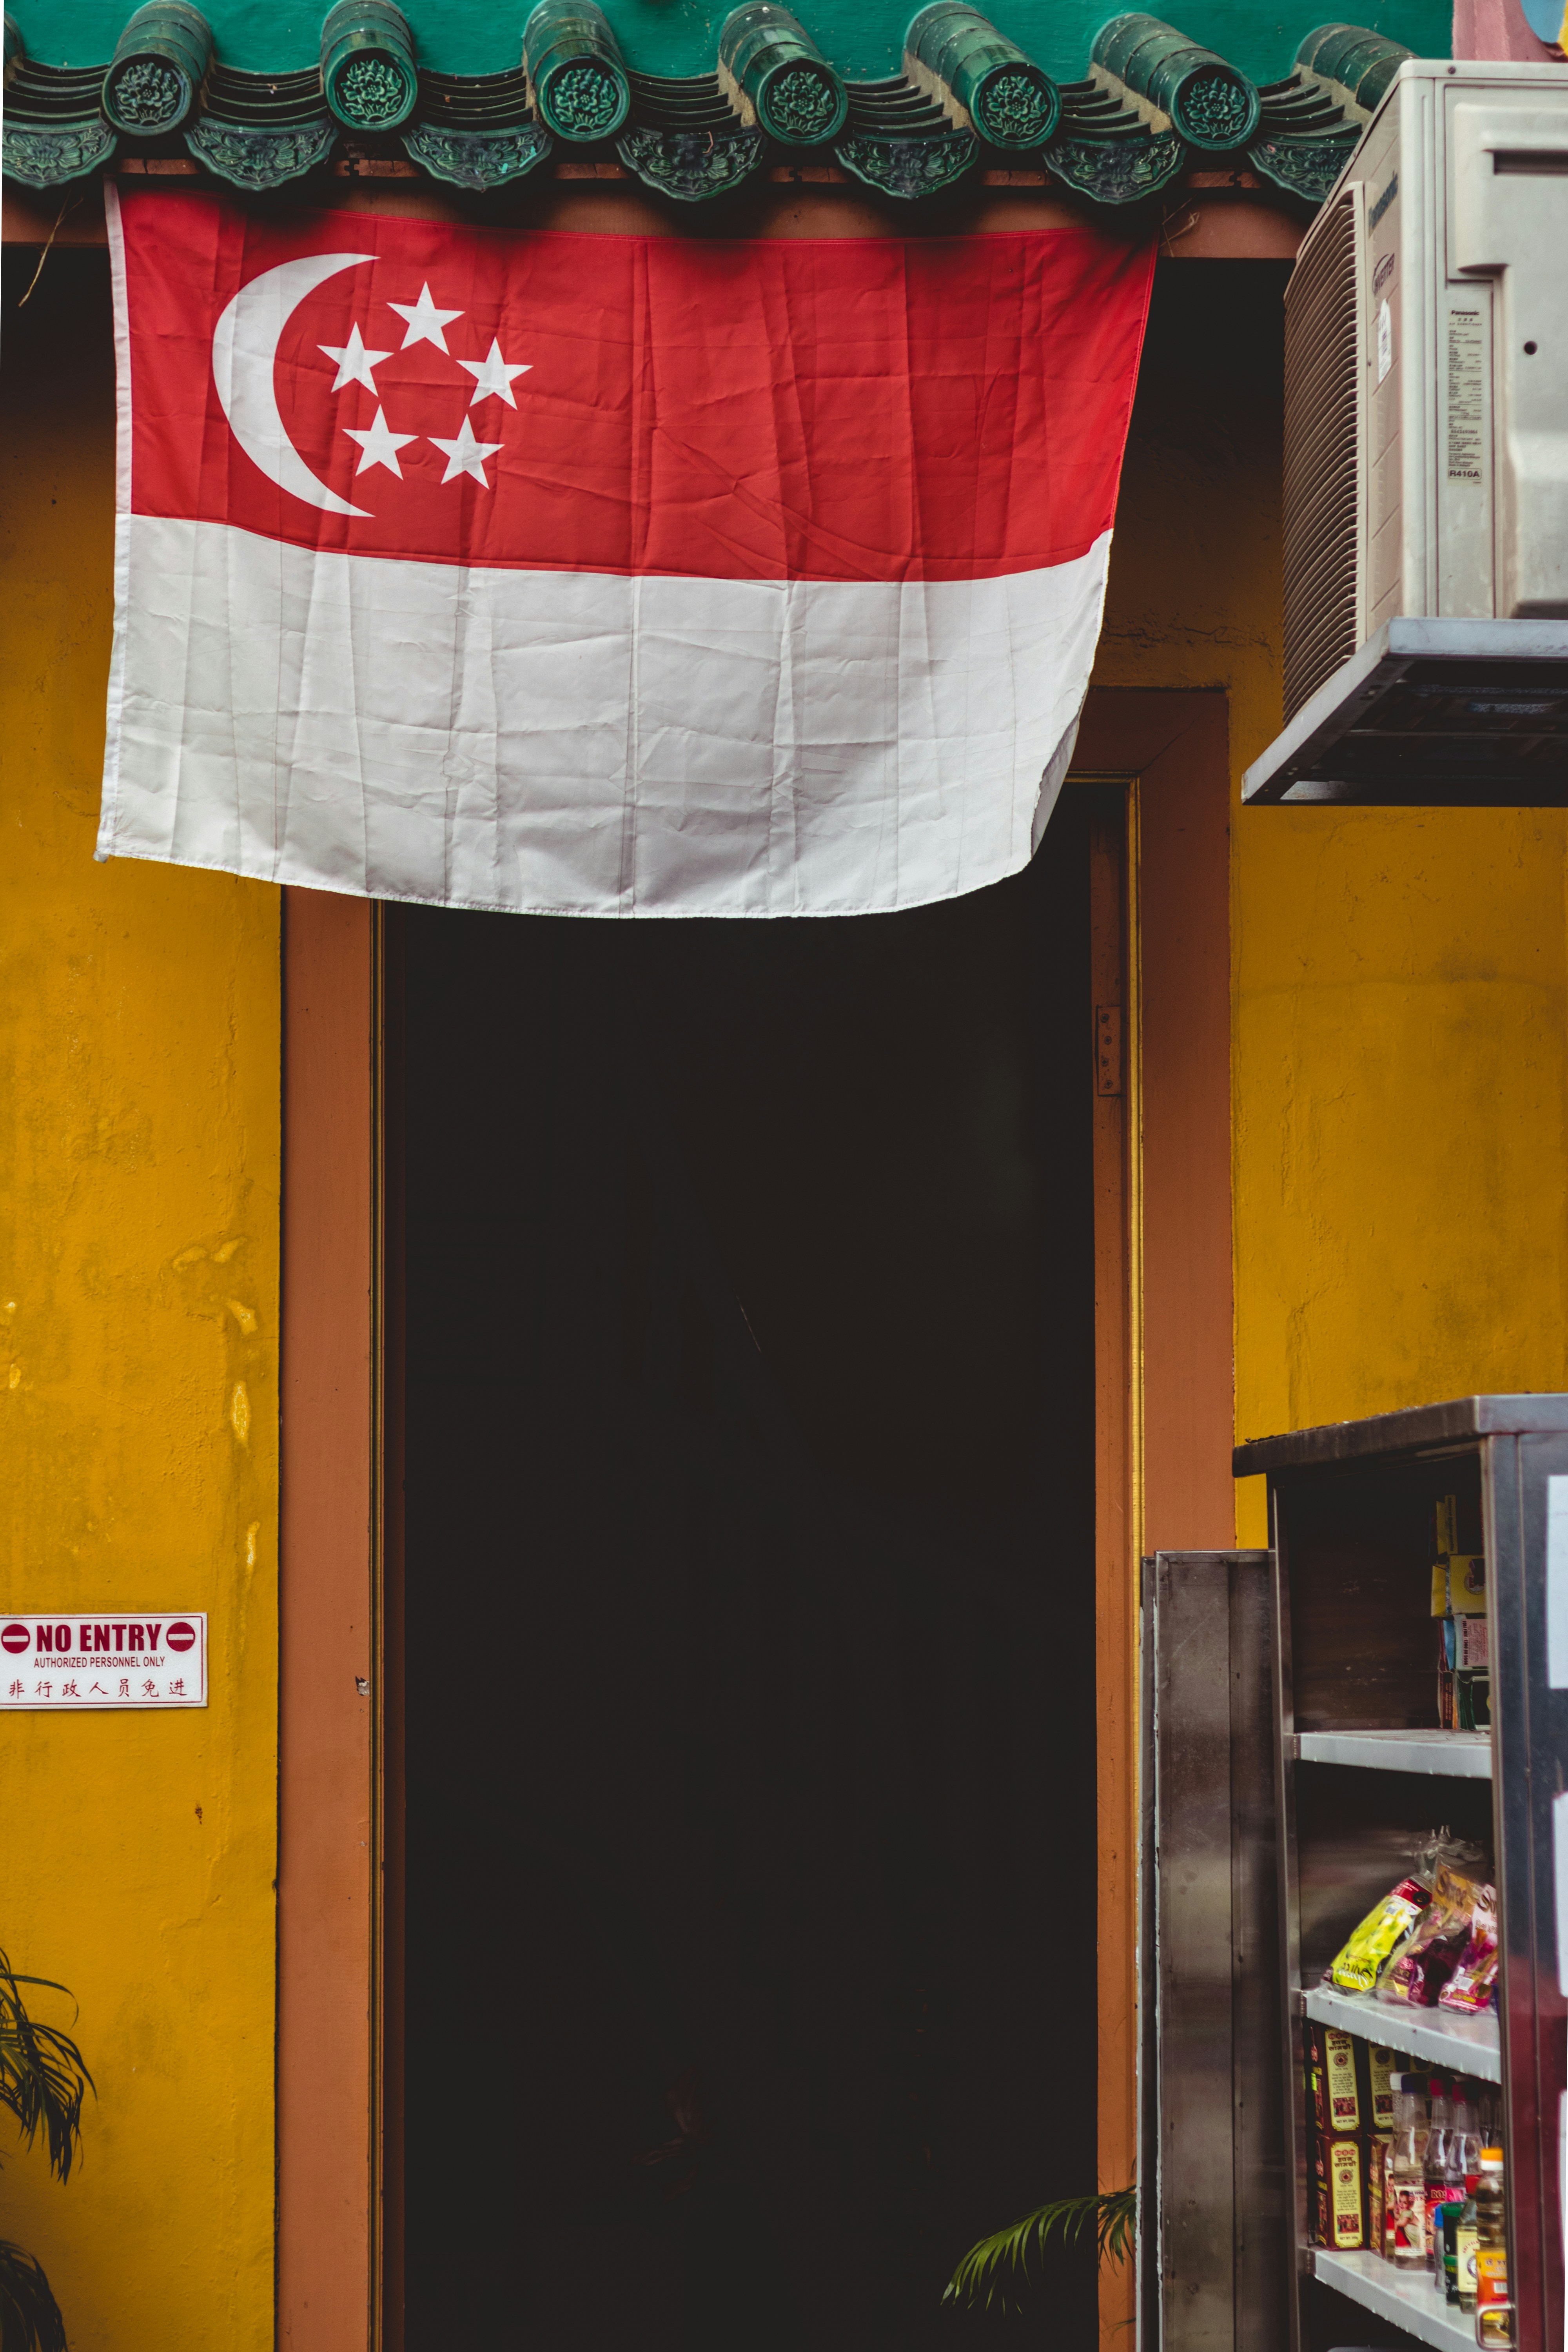 Singapore flag hung over a traditional building.